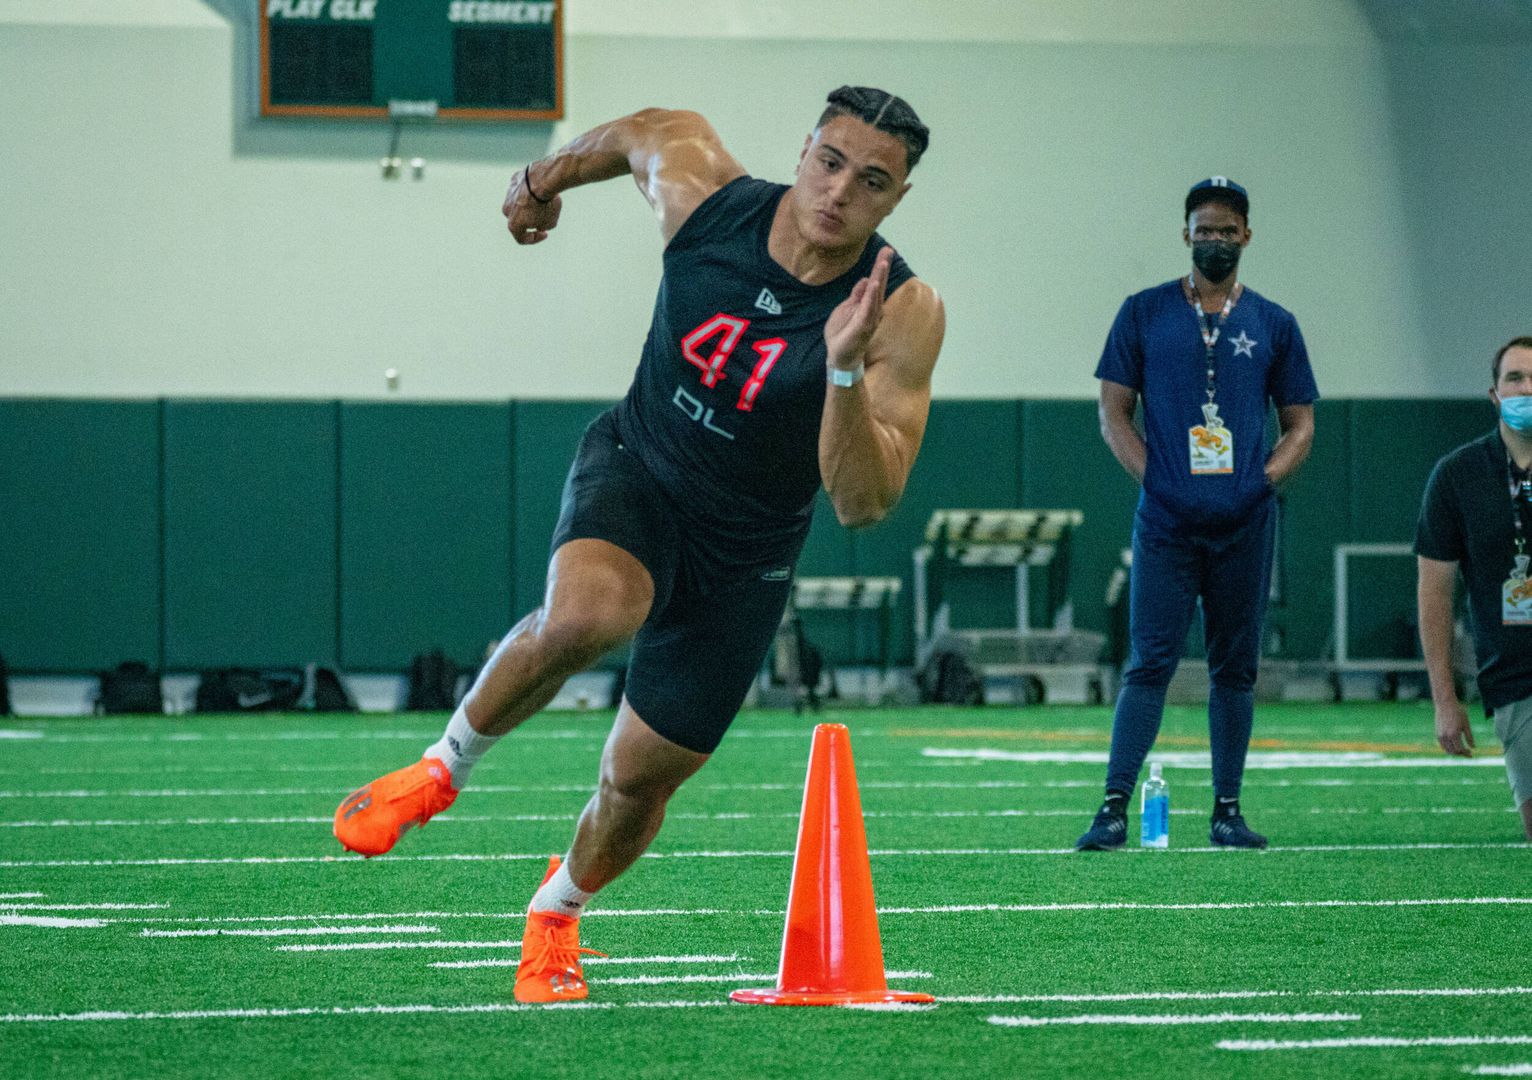 Photo Gallery: Canes Football Pro Day